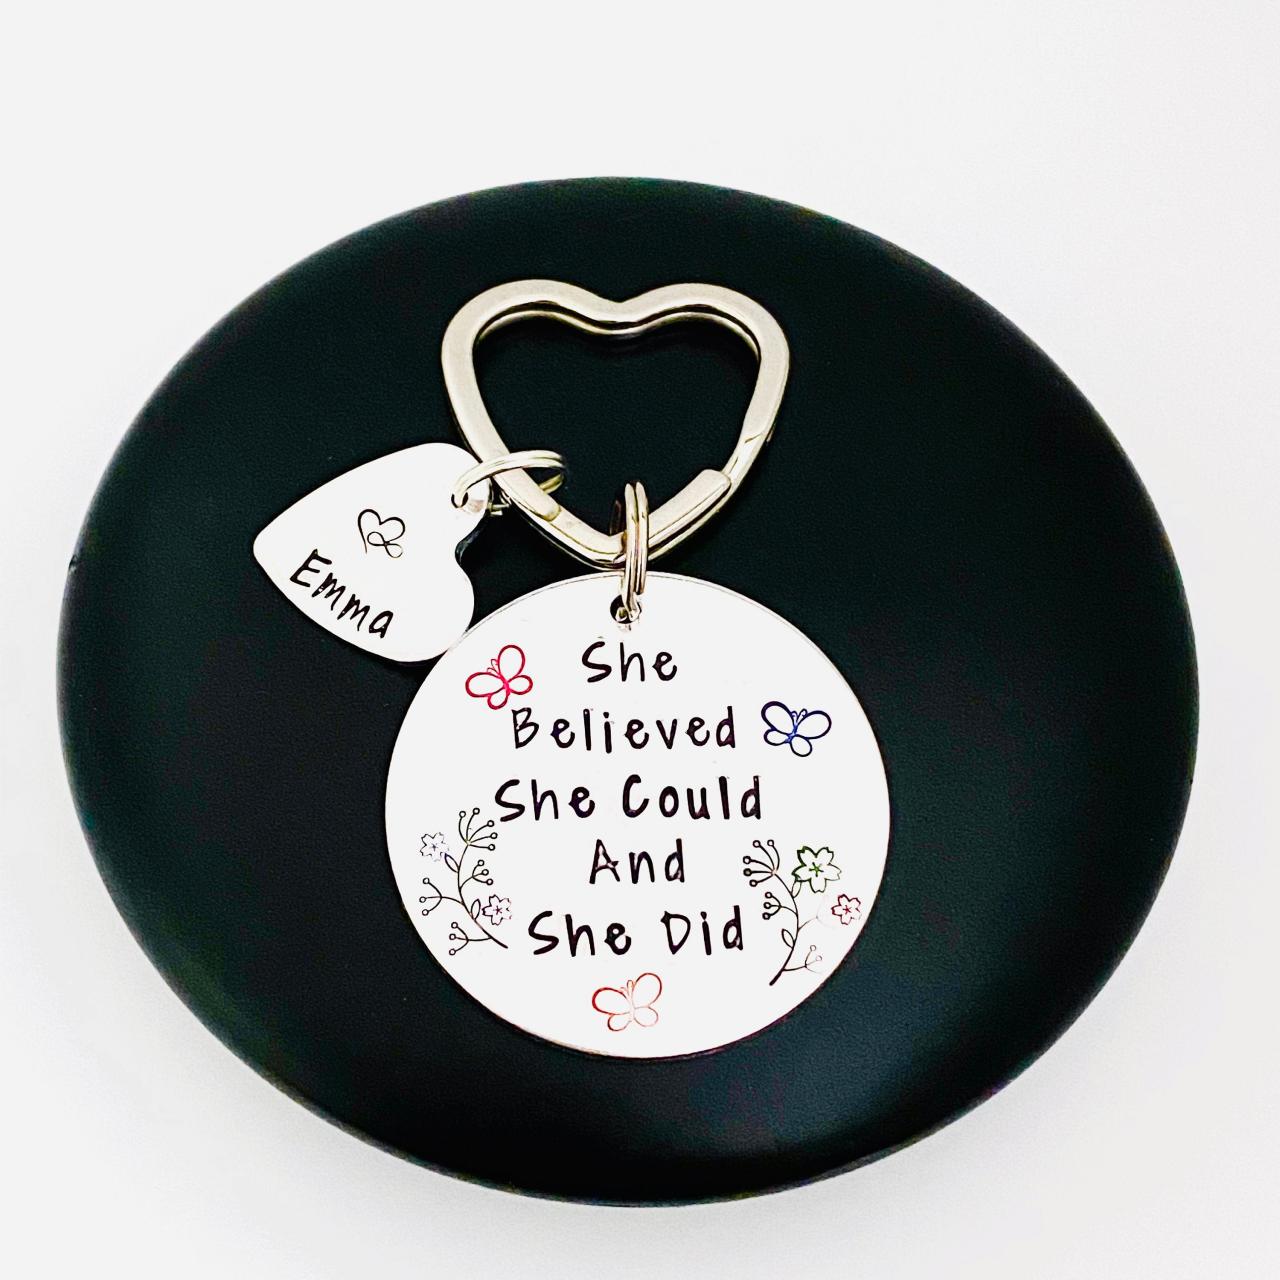 She Believed She Could And She Did Keyring, Personalised Name Keyring, Graduation Keychain, Motivation Gift, Graduation Gift, Gift For Her..